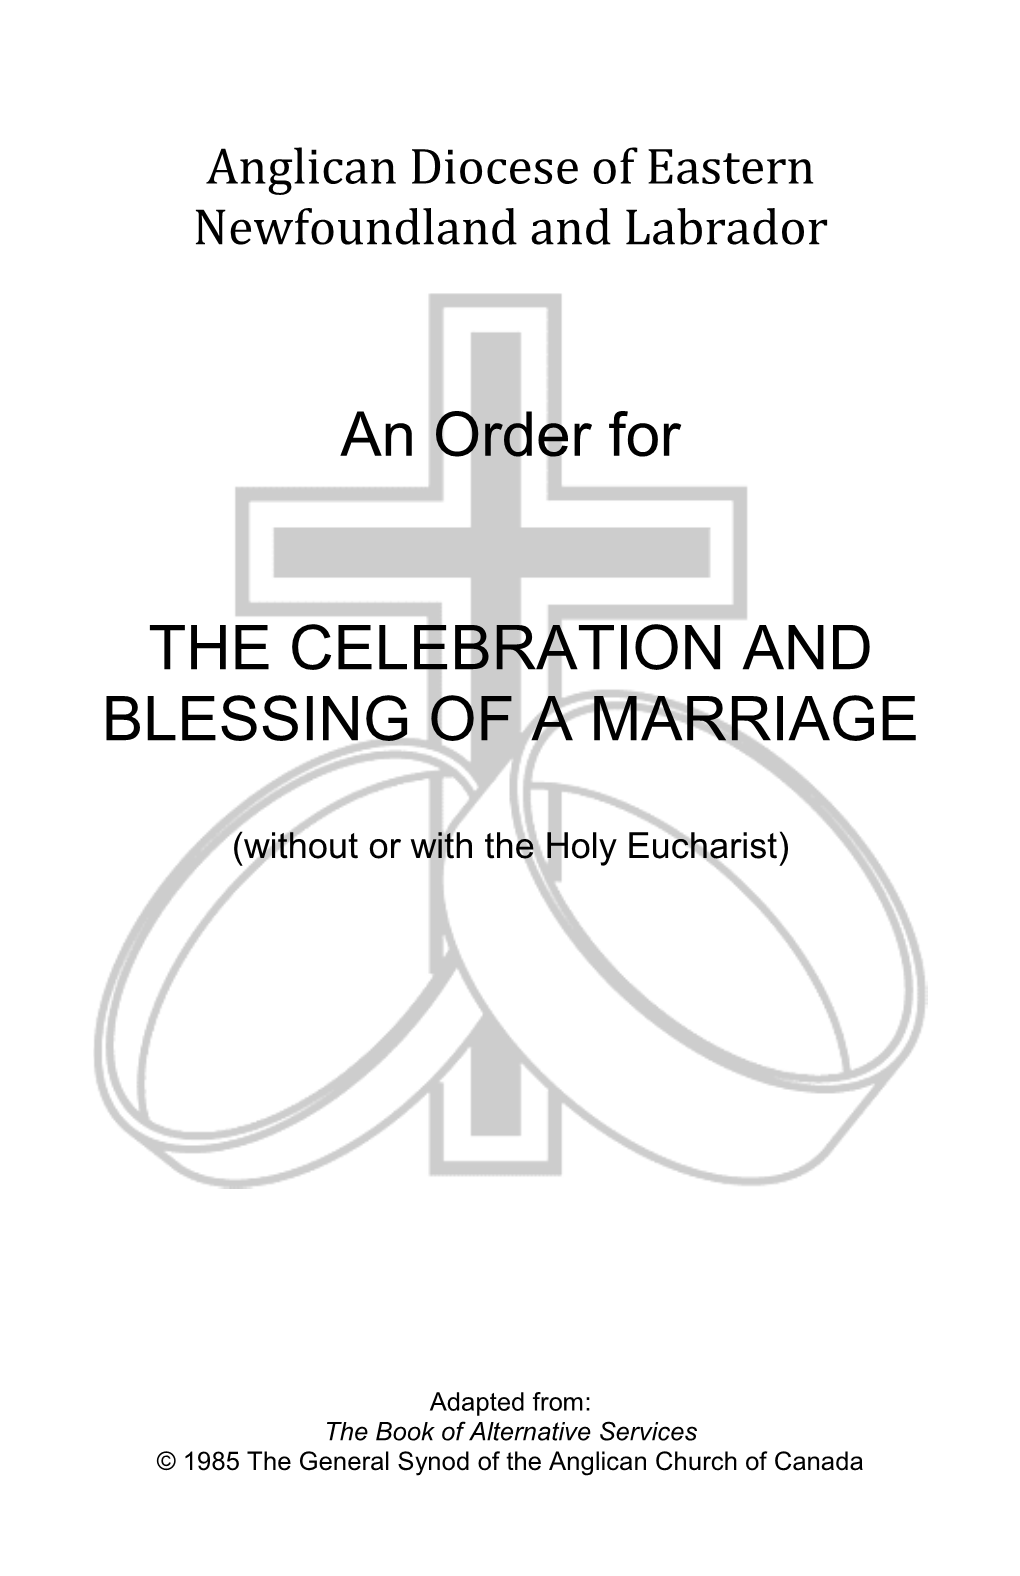 Celebration & Blessing of a Marriage 2019